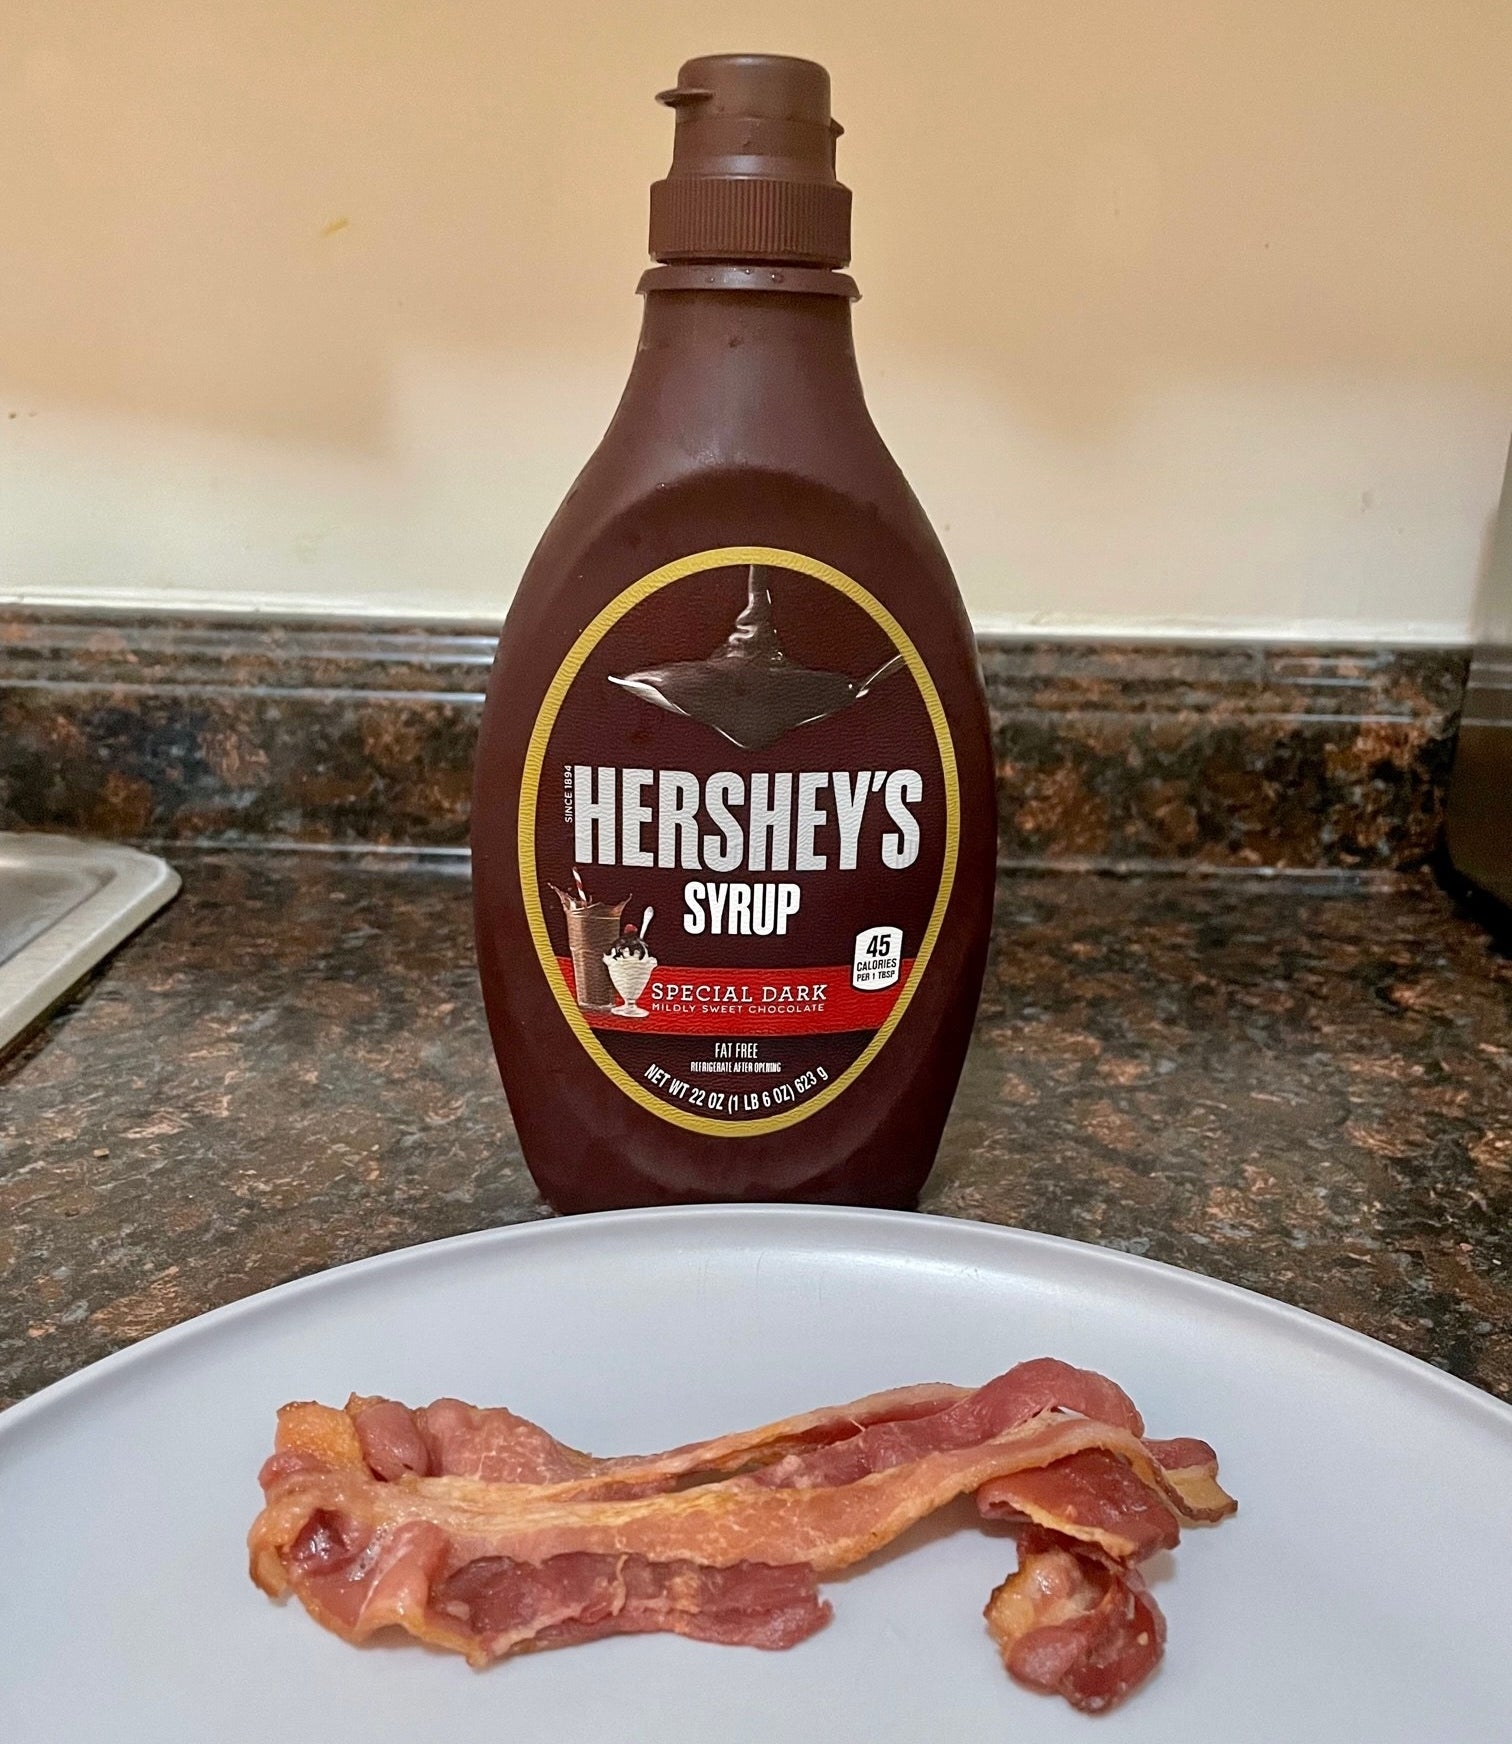 Bacon and chocolate syrup